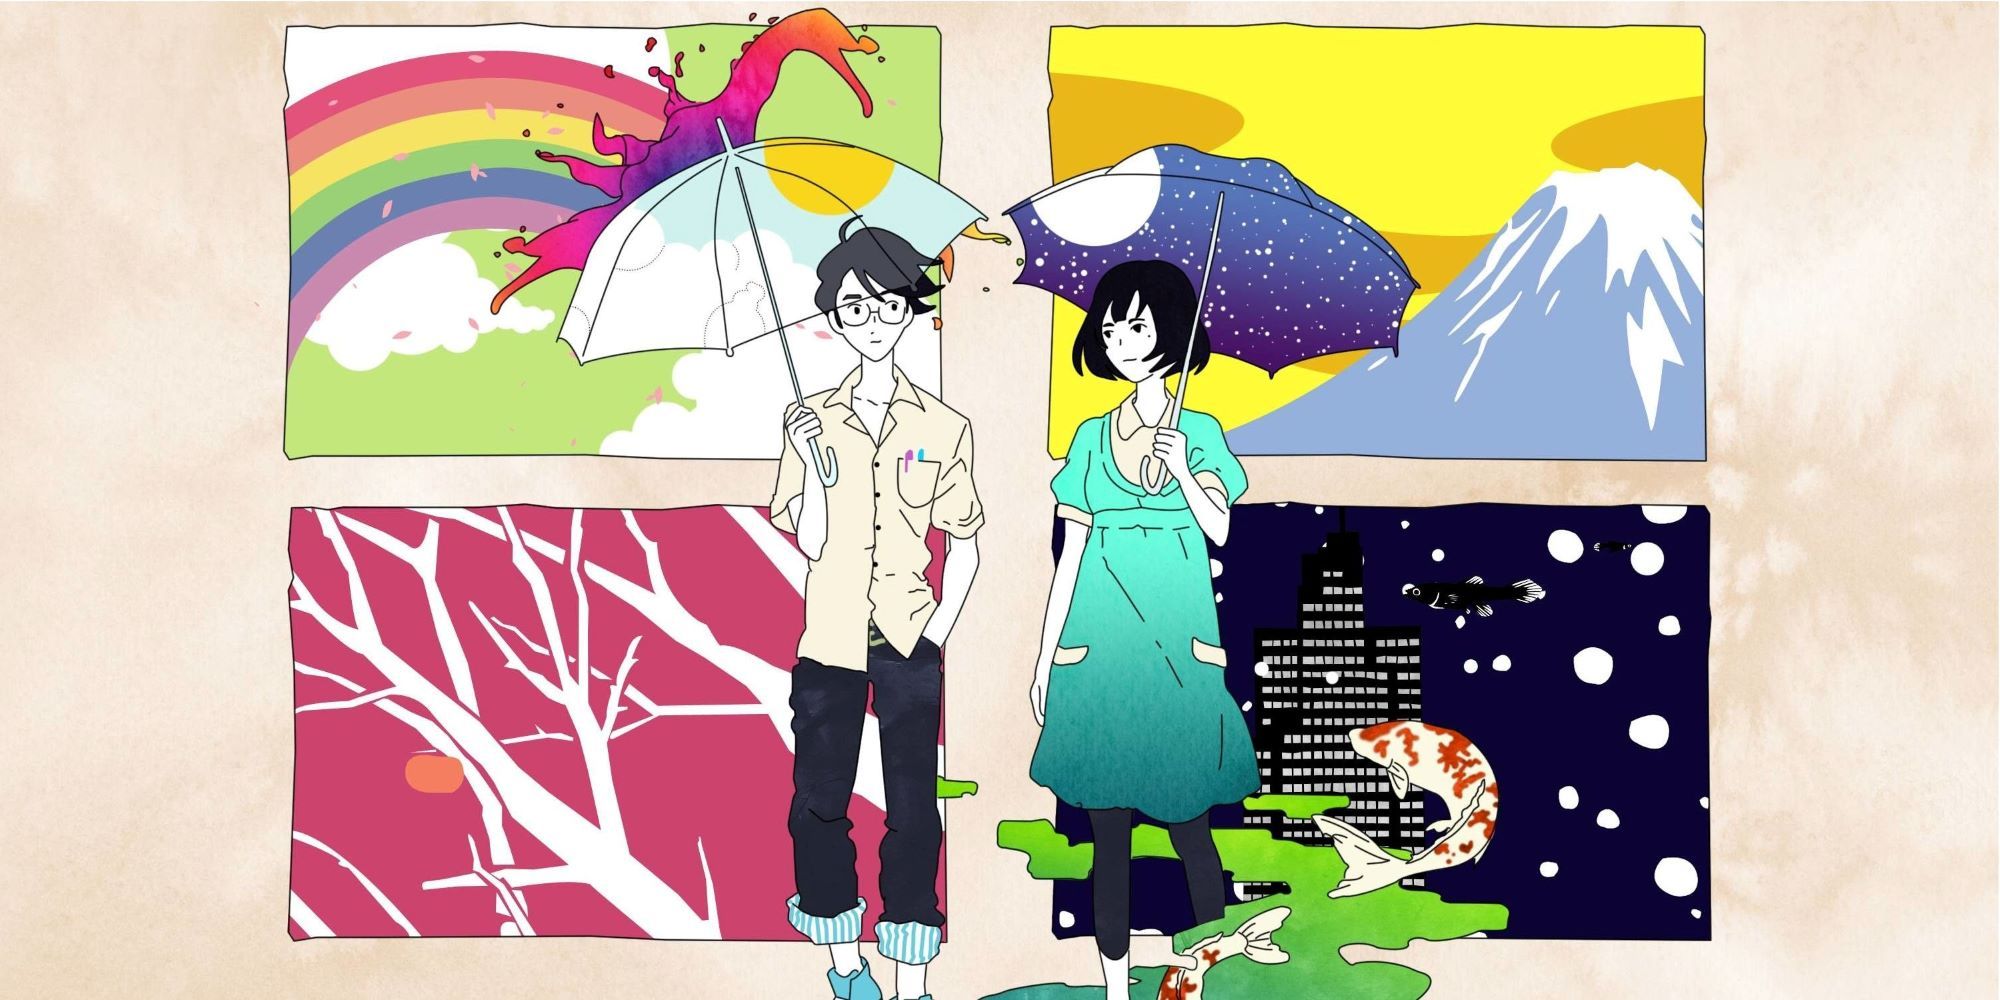 The two main characters from The Tatami Galaxy holding umbrellas